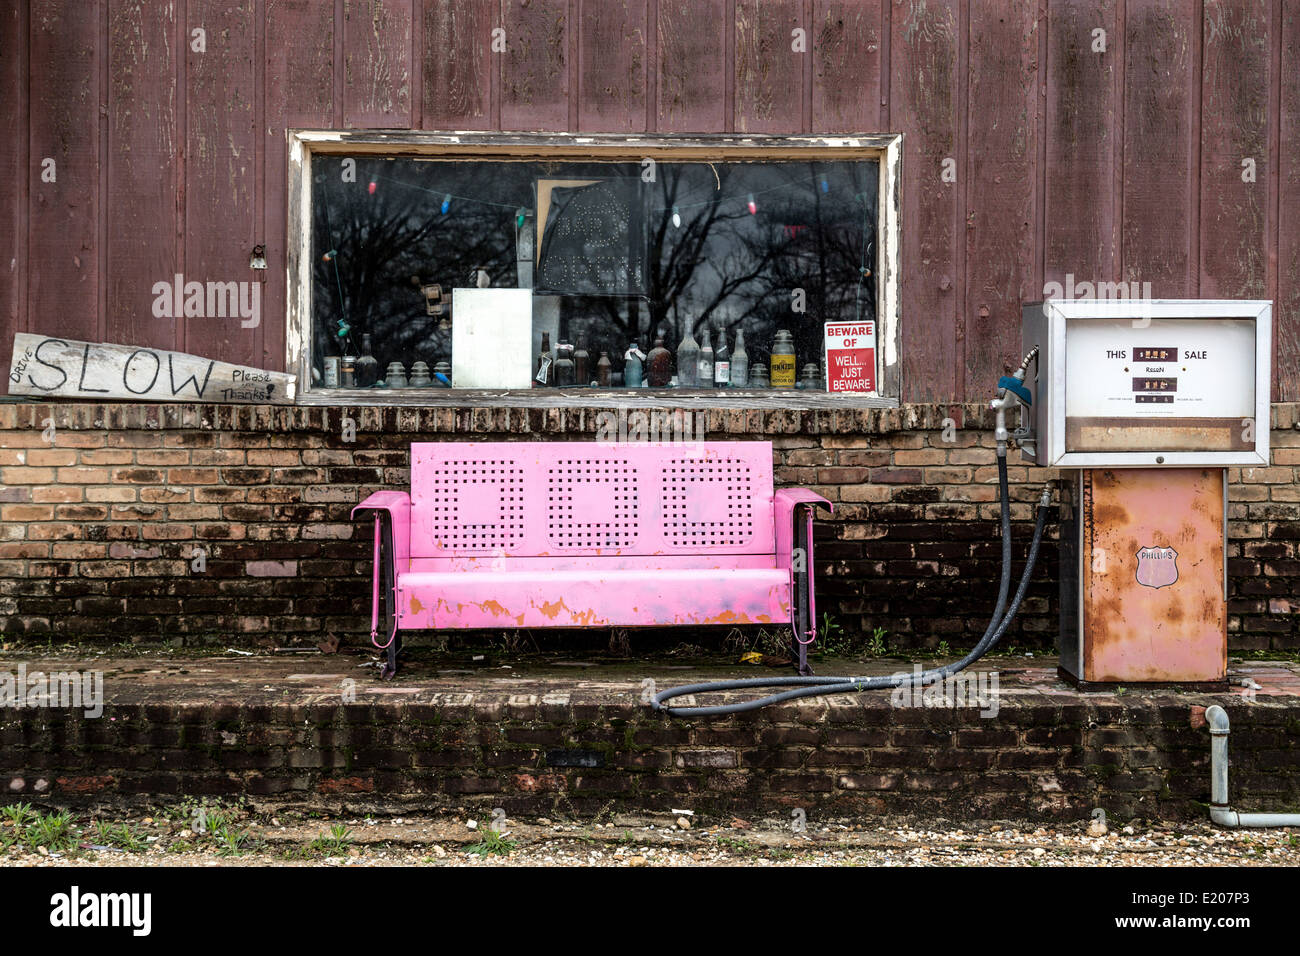 Old gas station with pump, in front a pink metal sofa, Clarksdale, Mississippi, United States Stock Photo